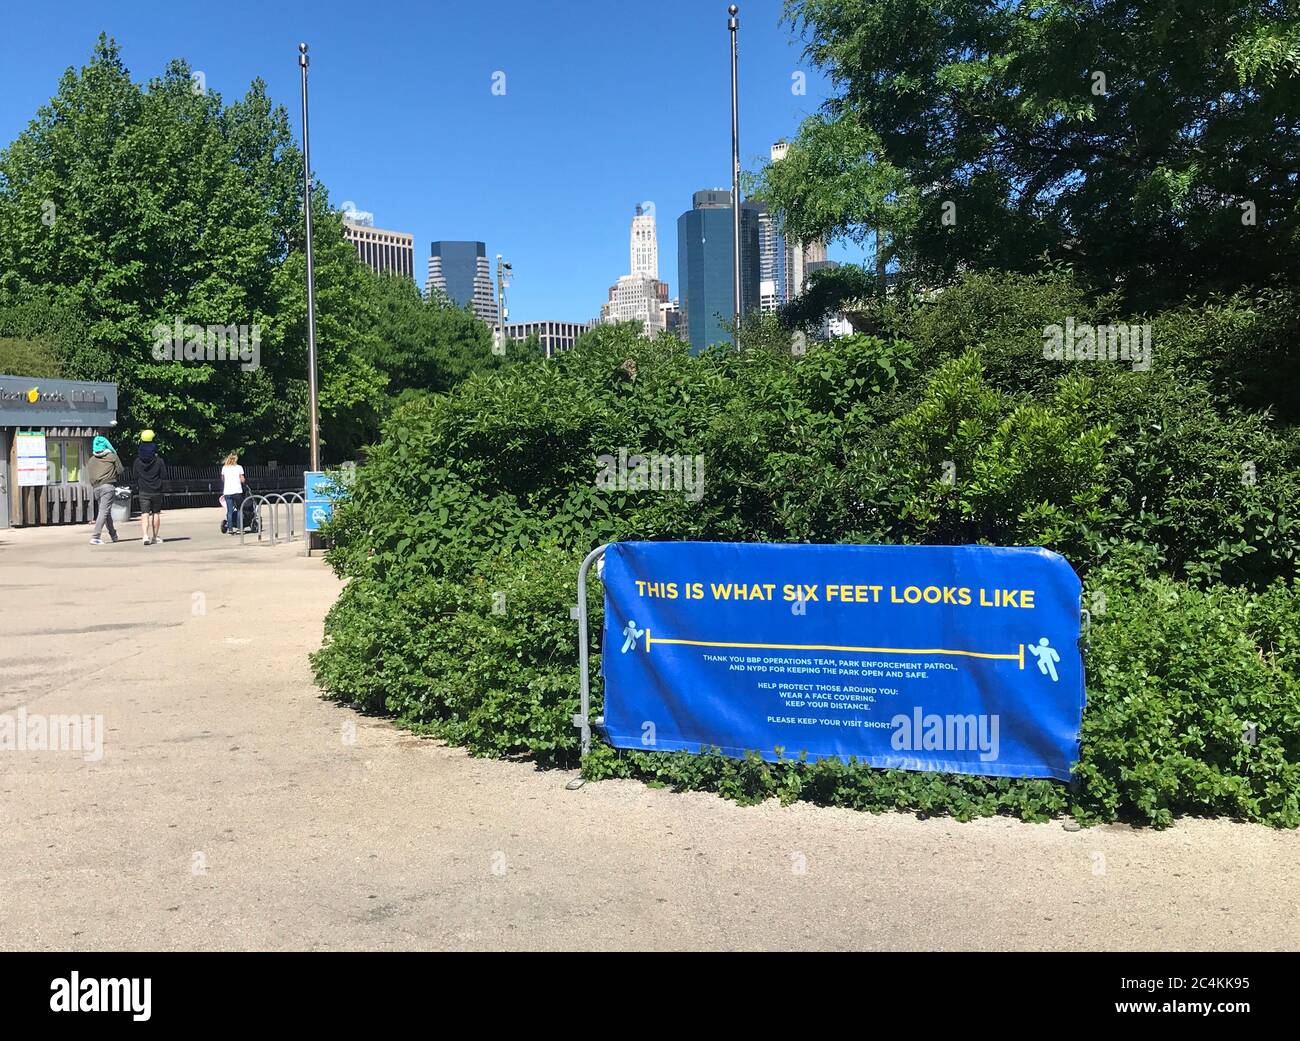 Social Distancing sign in Brooklyn Bridge Park reminding people to keep six feet apart to prevent the spread of the Coronavirus / COVID-19 Stock Photo